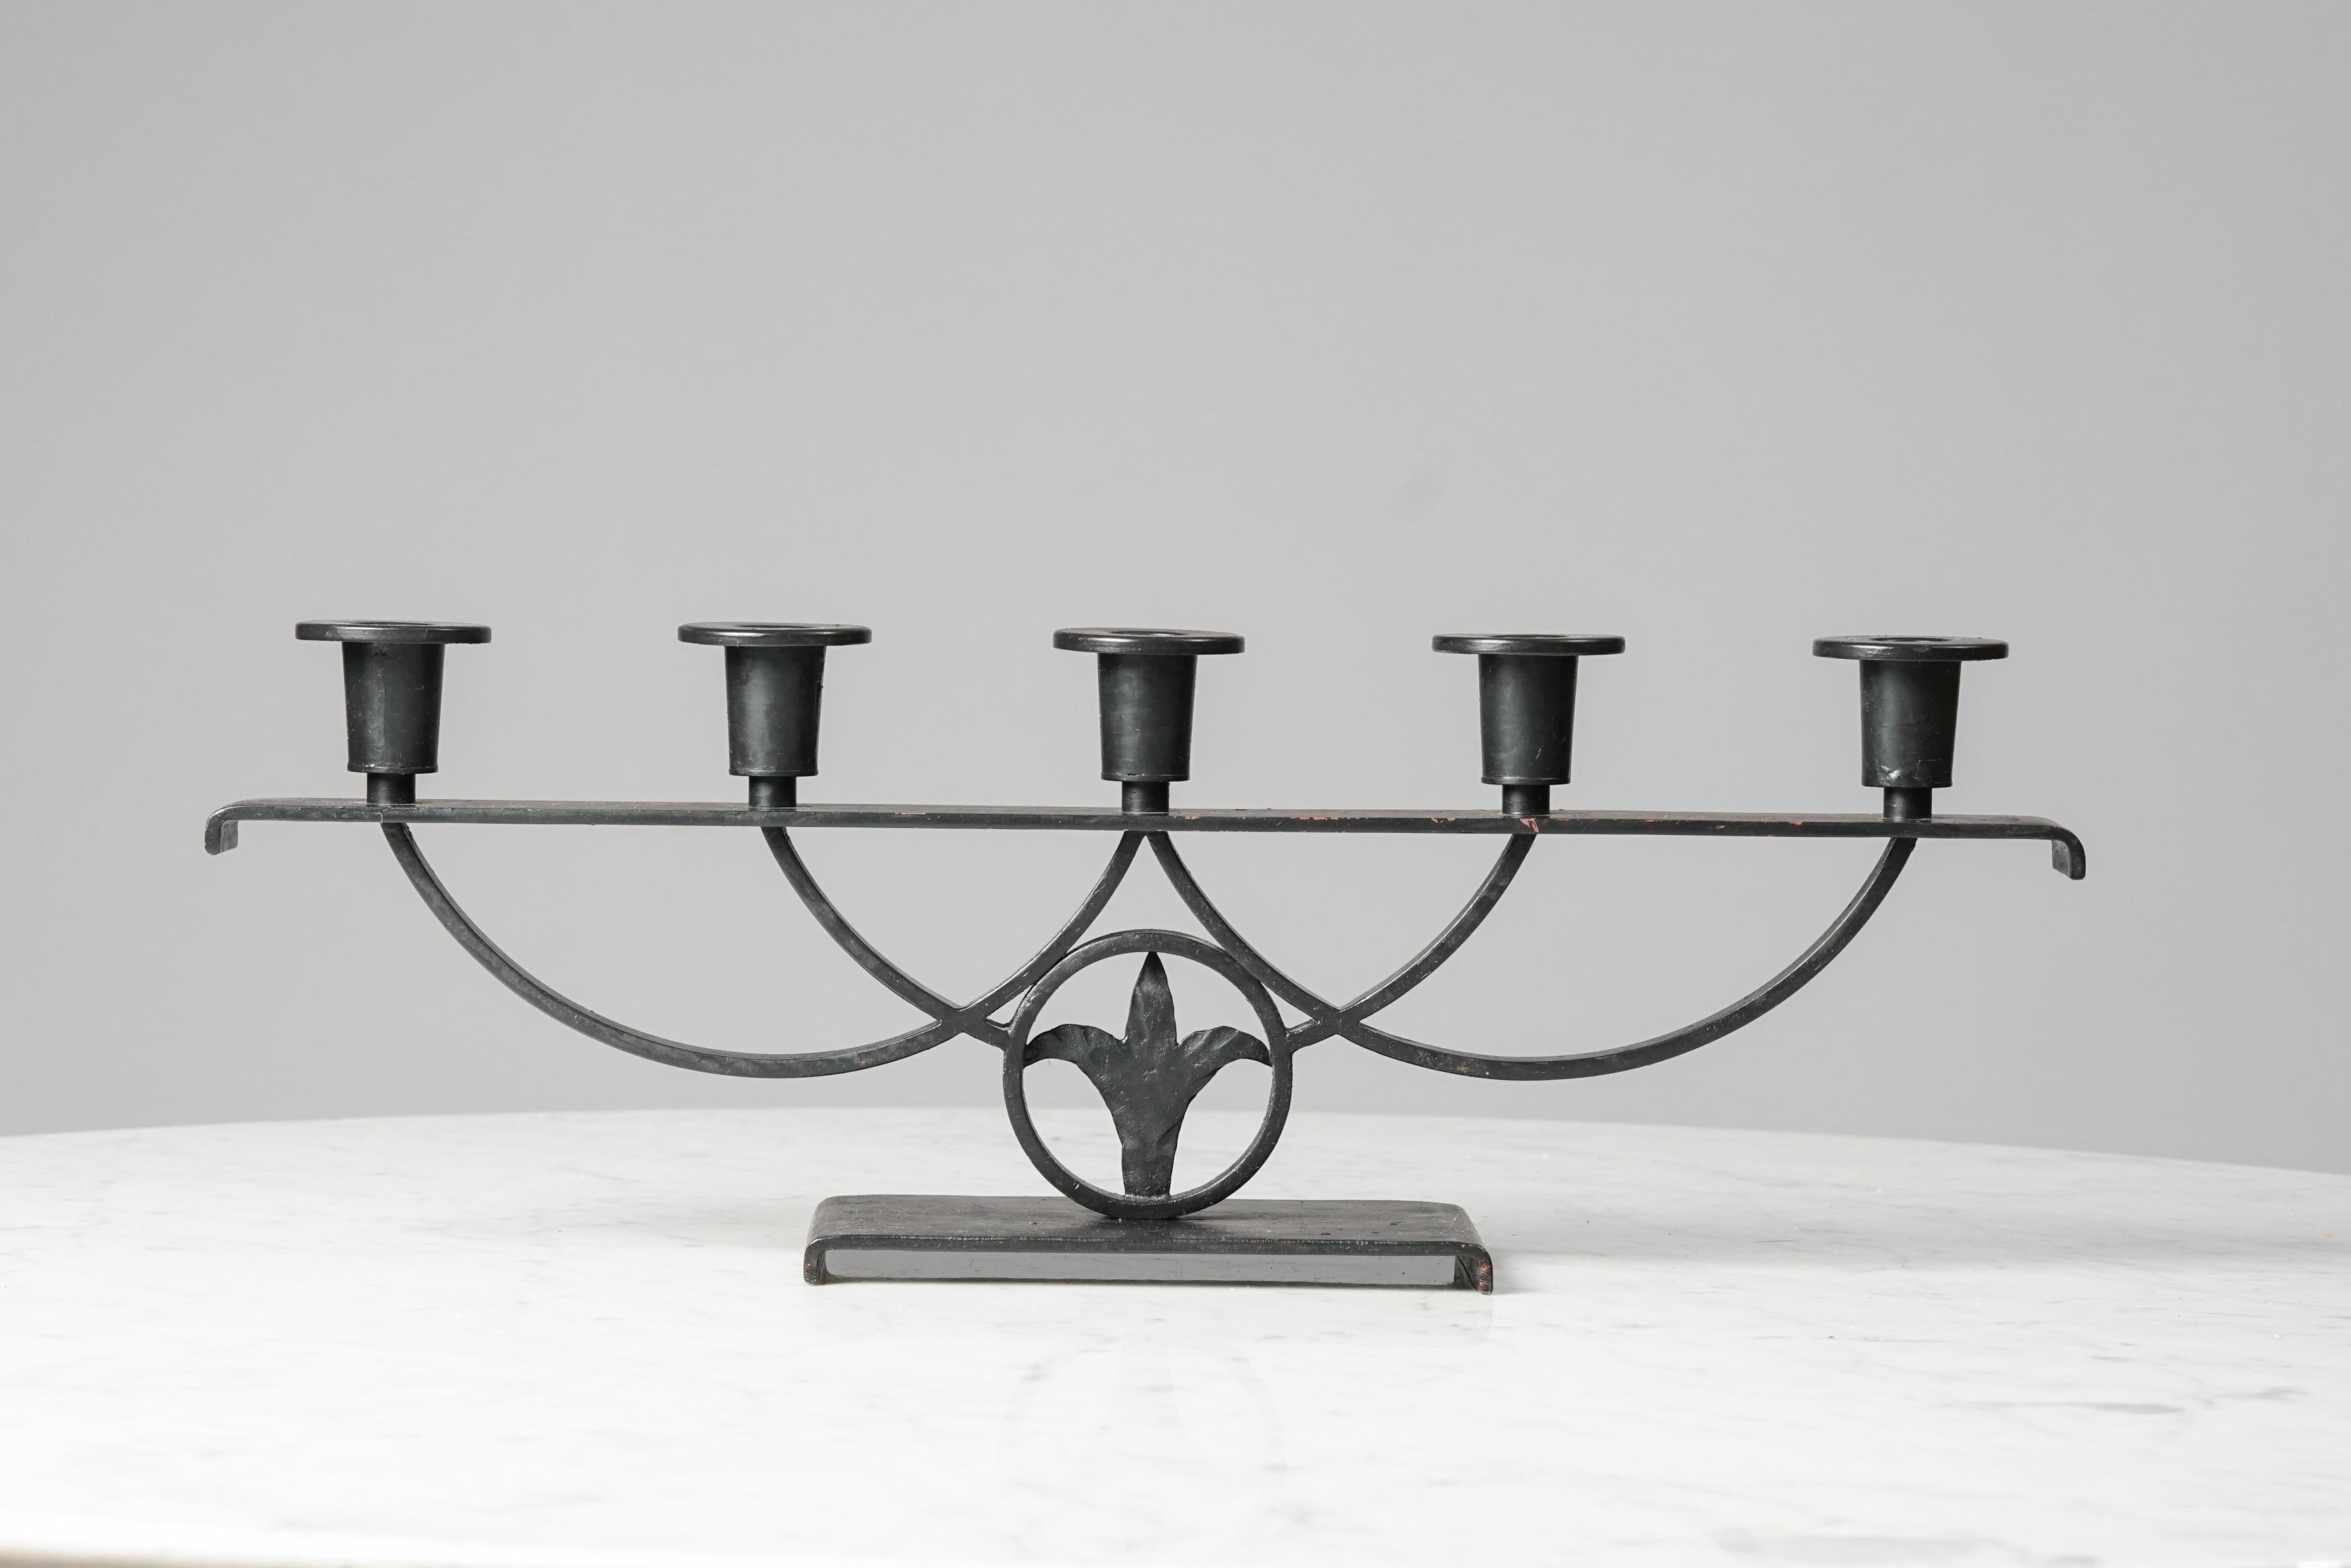 A rare iron candelabra by Taidetakomo Hakkarainen Finland from the early 1900s. Good vintage condition, minor wear consistent with age and use. 

